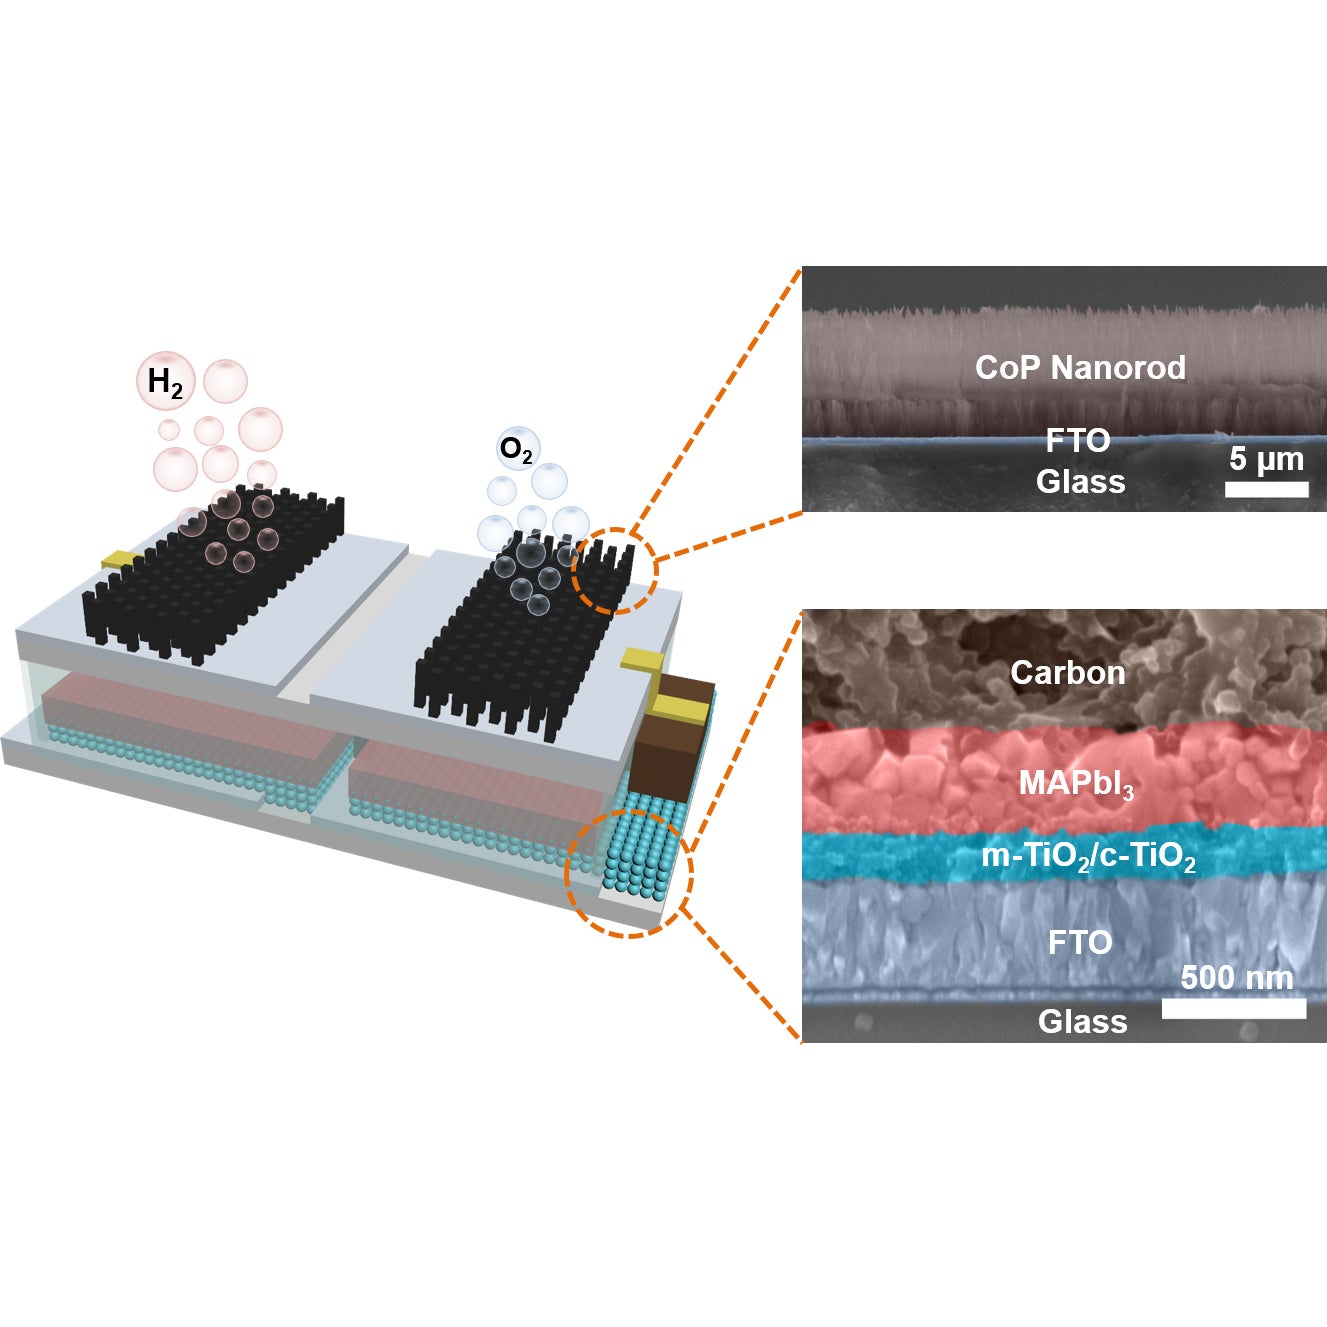 A real integrated device consisting of two series-connected perovskite solar cells (PSCs) and two CoP catalyst electrodes was proposed, which can be immersed into the aqueous solution directly for solar-driven water splitting. Benefiting from the low-cost and facile encapsulation technique, this artificial leaf possesses a compact structure and well-connected circuits for the process of charge carriers generation, transfer, and storage, revealing a solar-to-hydrogen efficiency of as high as 6.7%.